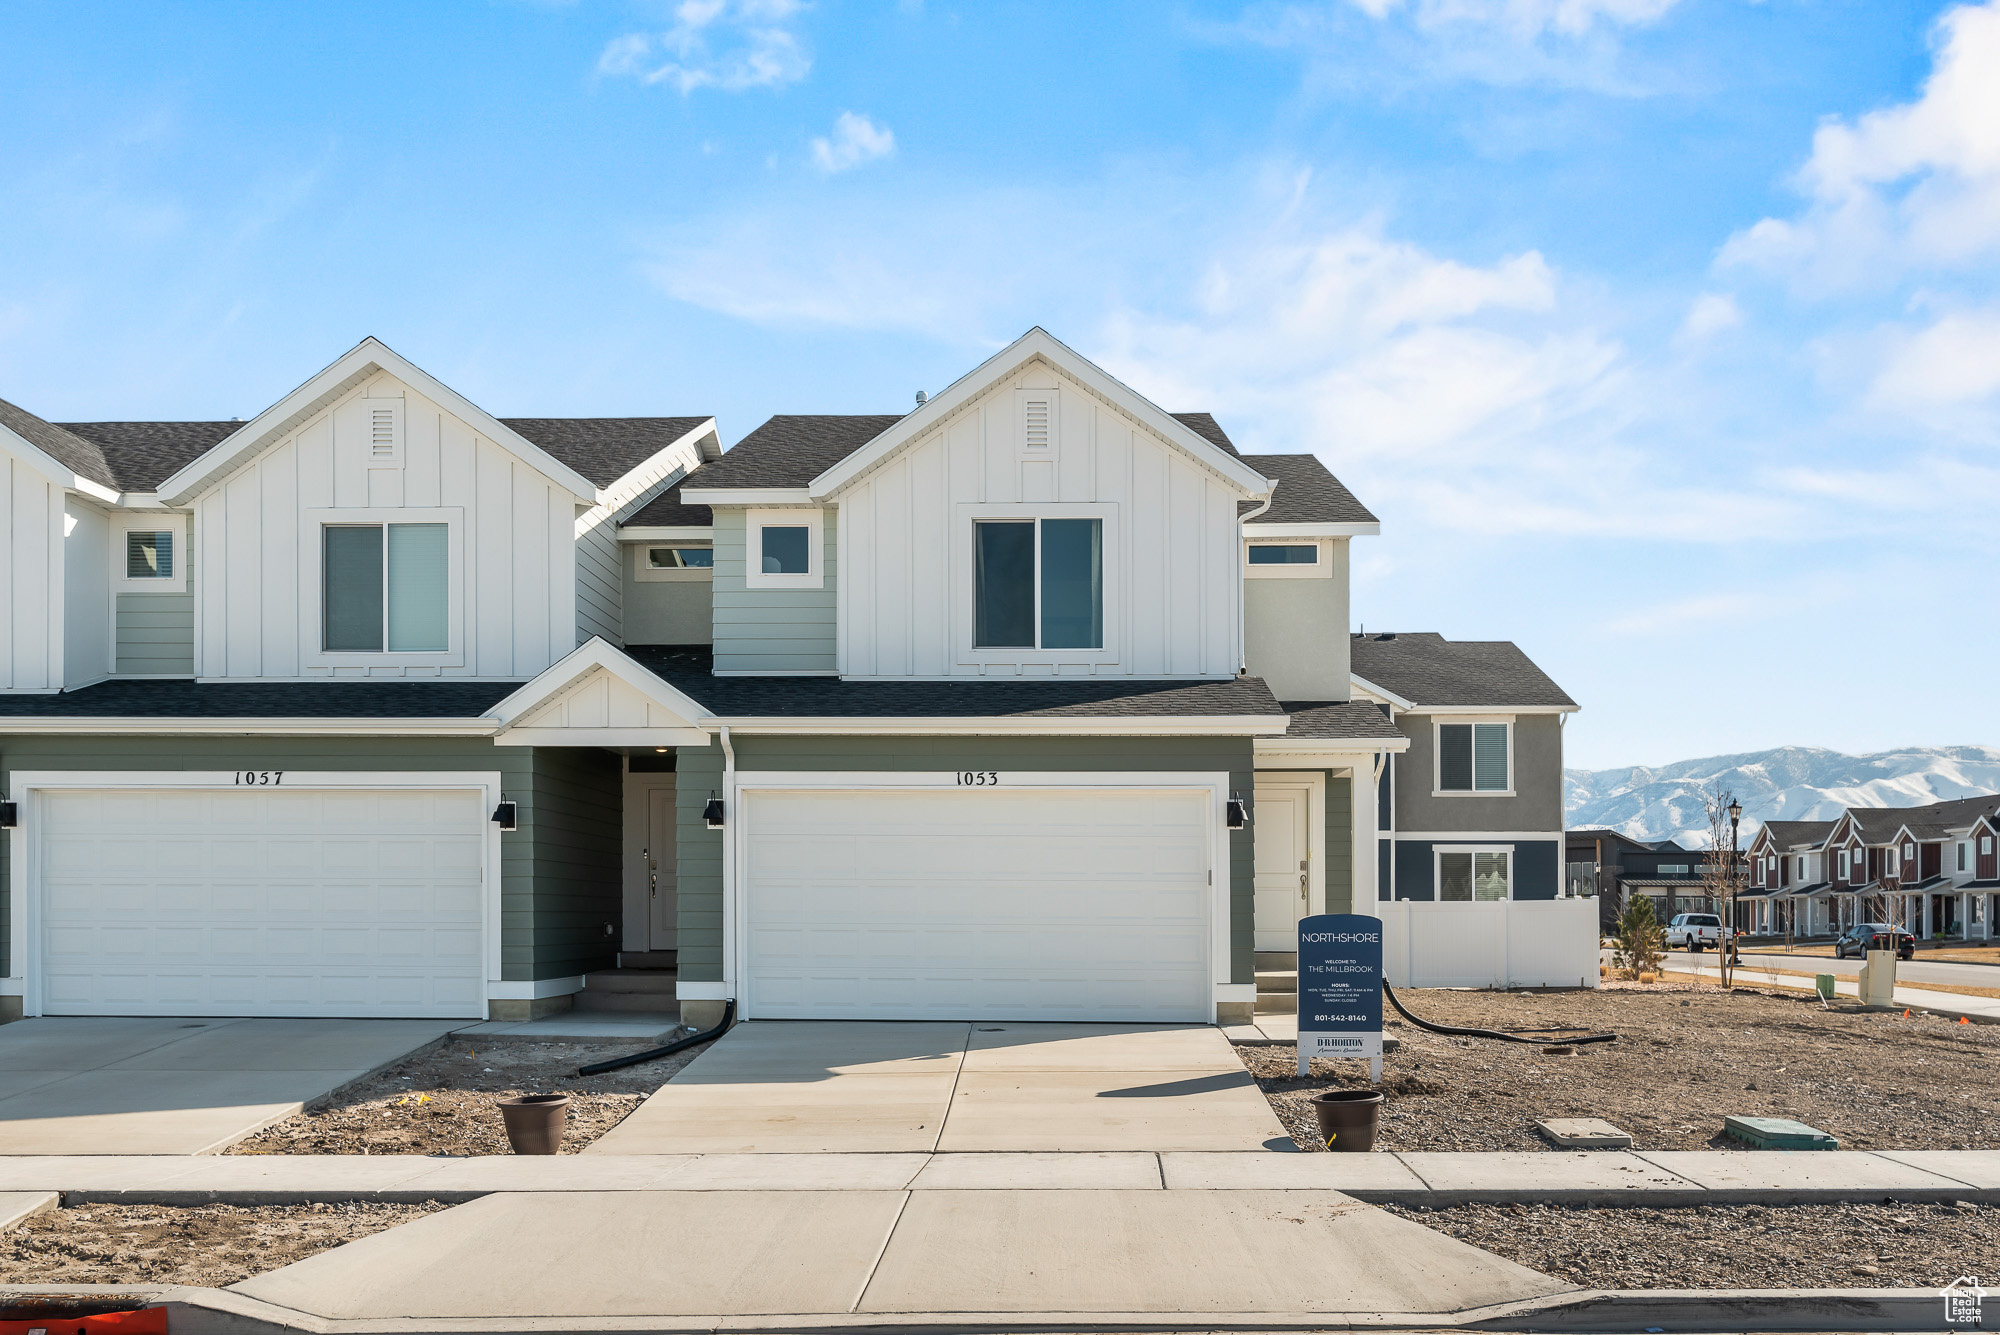 3805 S BALD KNOLL #1458, Magna, Utah 84044, 3 Bedrooms Bedrooms, 9 Rooms Rooms,2 BathroomsBathrooms,Residential,For sale,BALD KNOLL,1983913